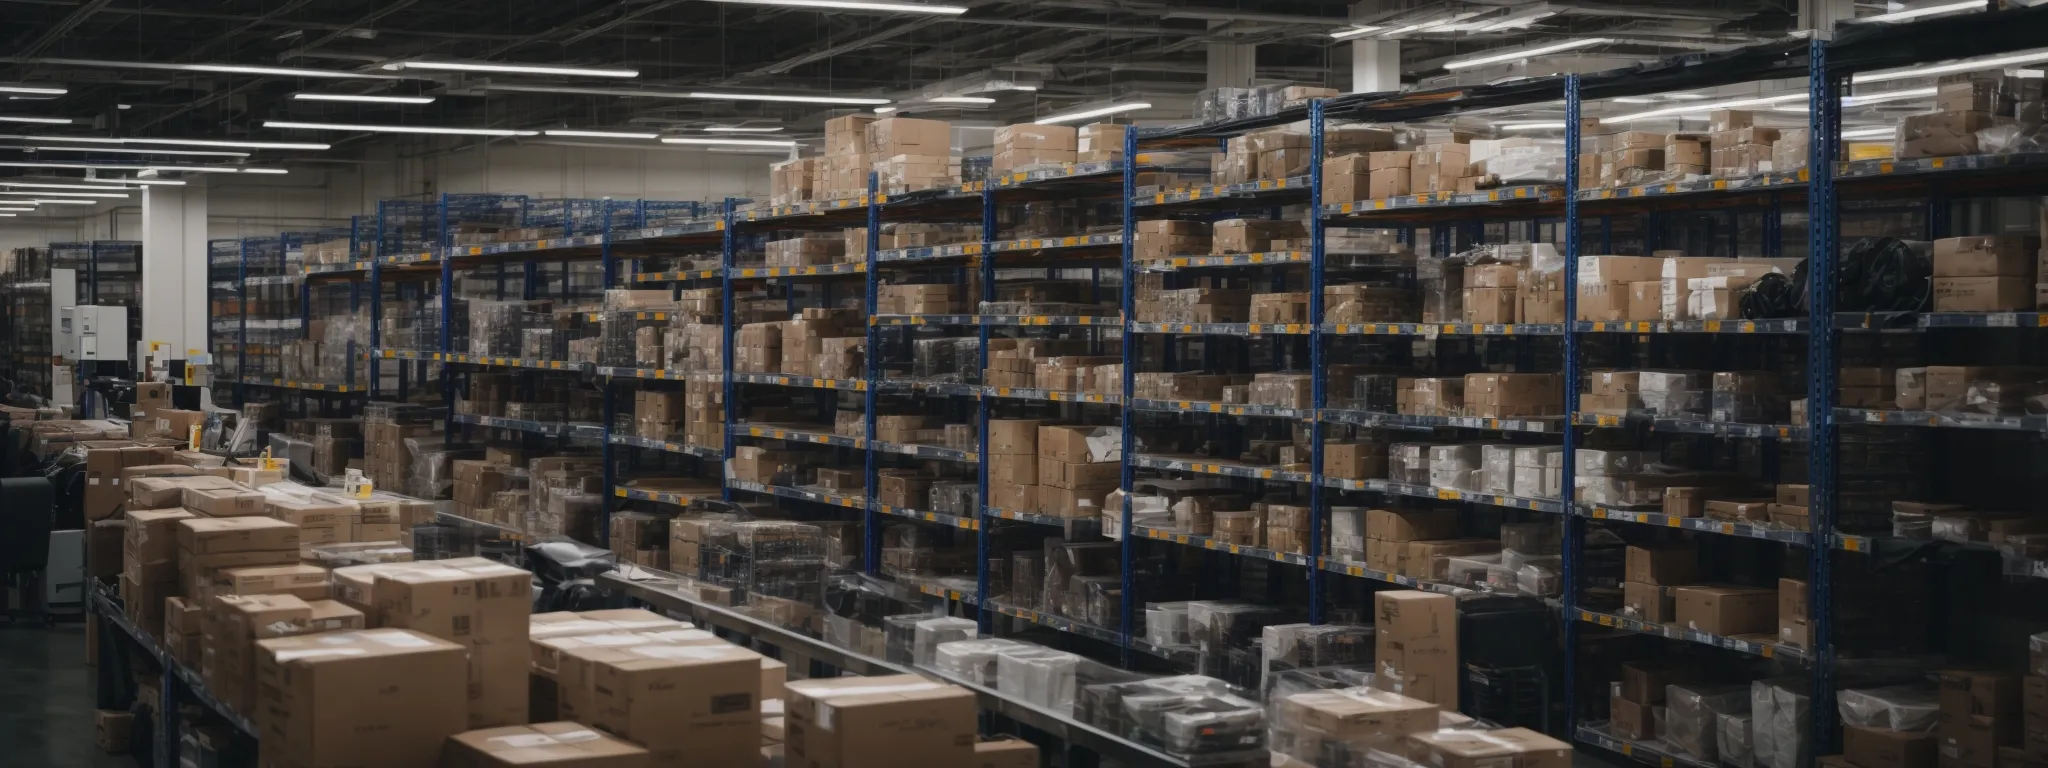 a bustling e-commerce warehouse with neatly organized shelves and a centrally placed computer screen displaying graphs and analytics.